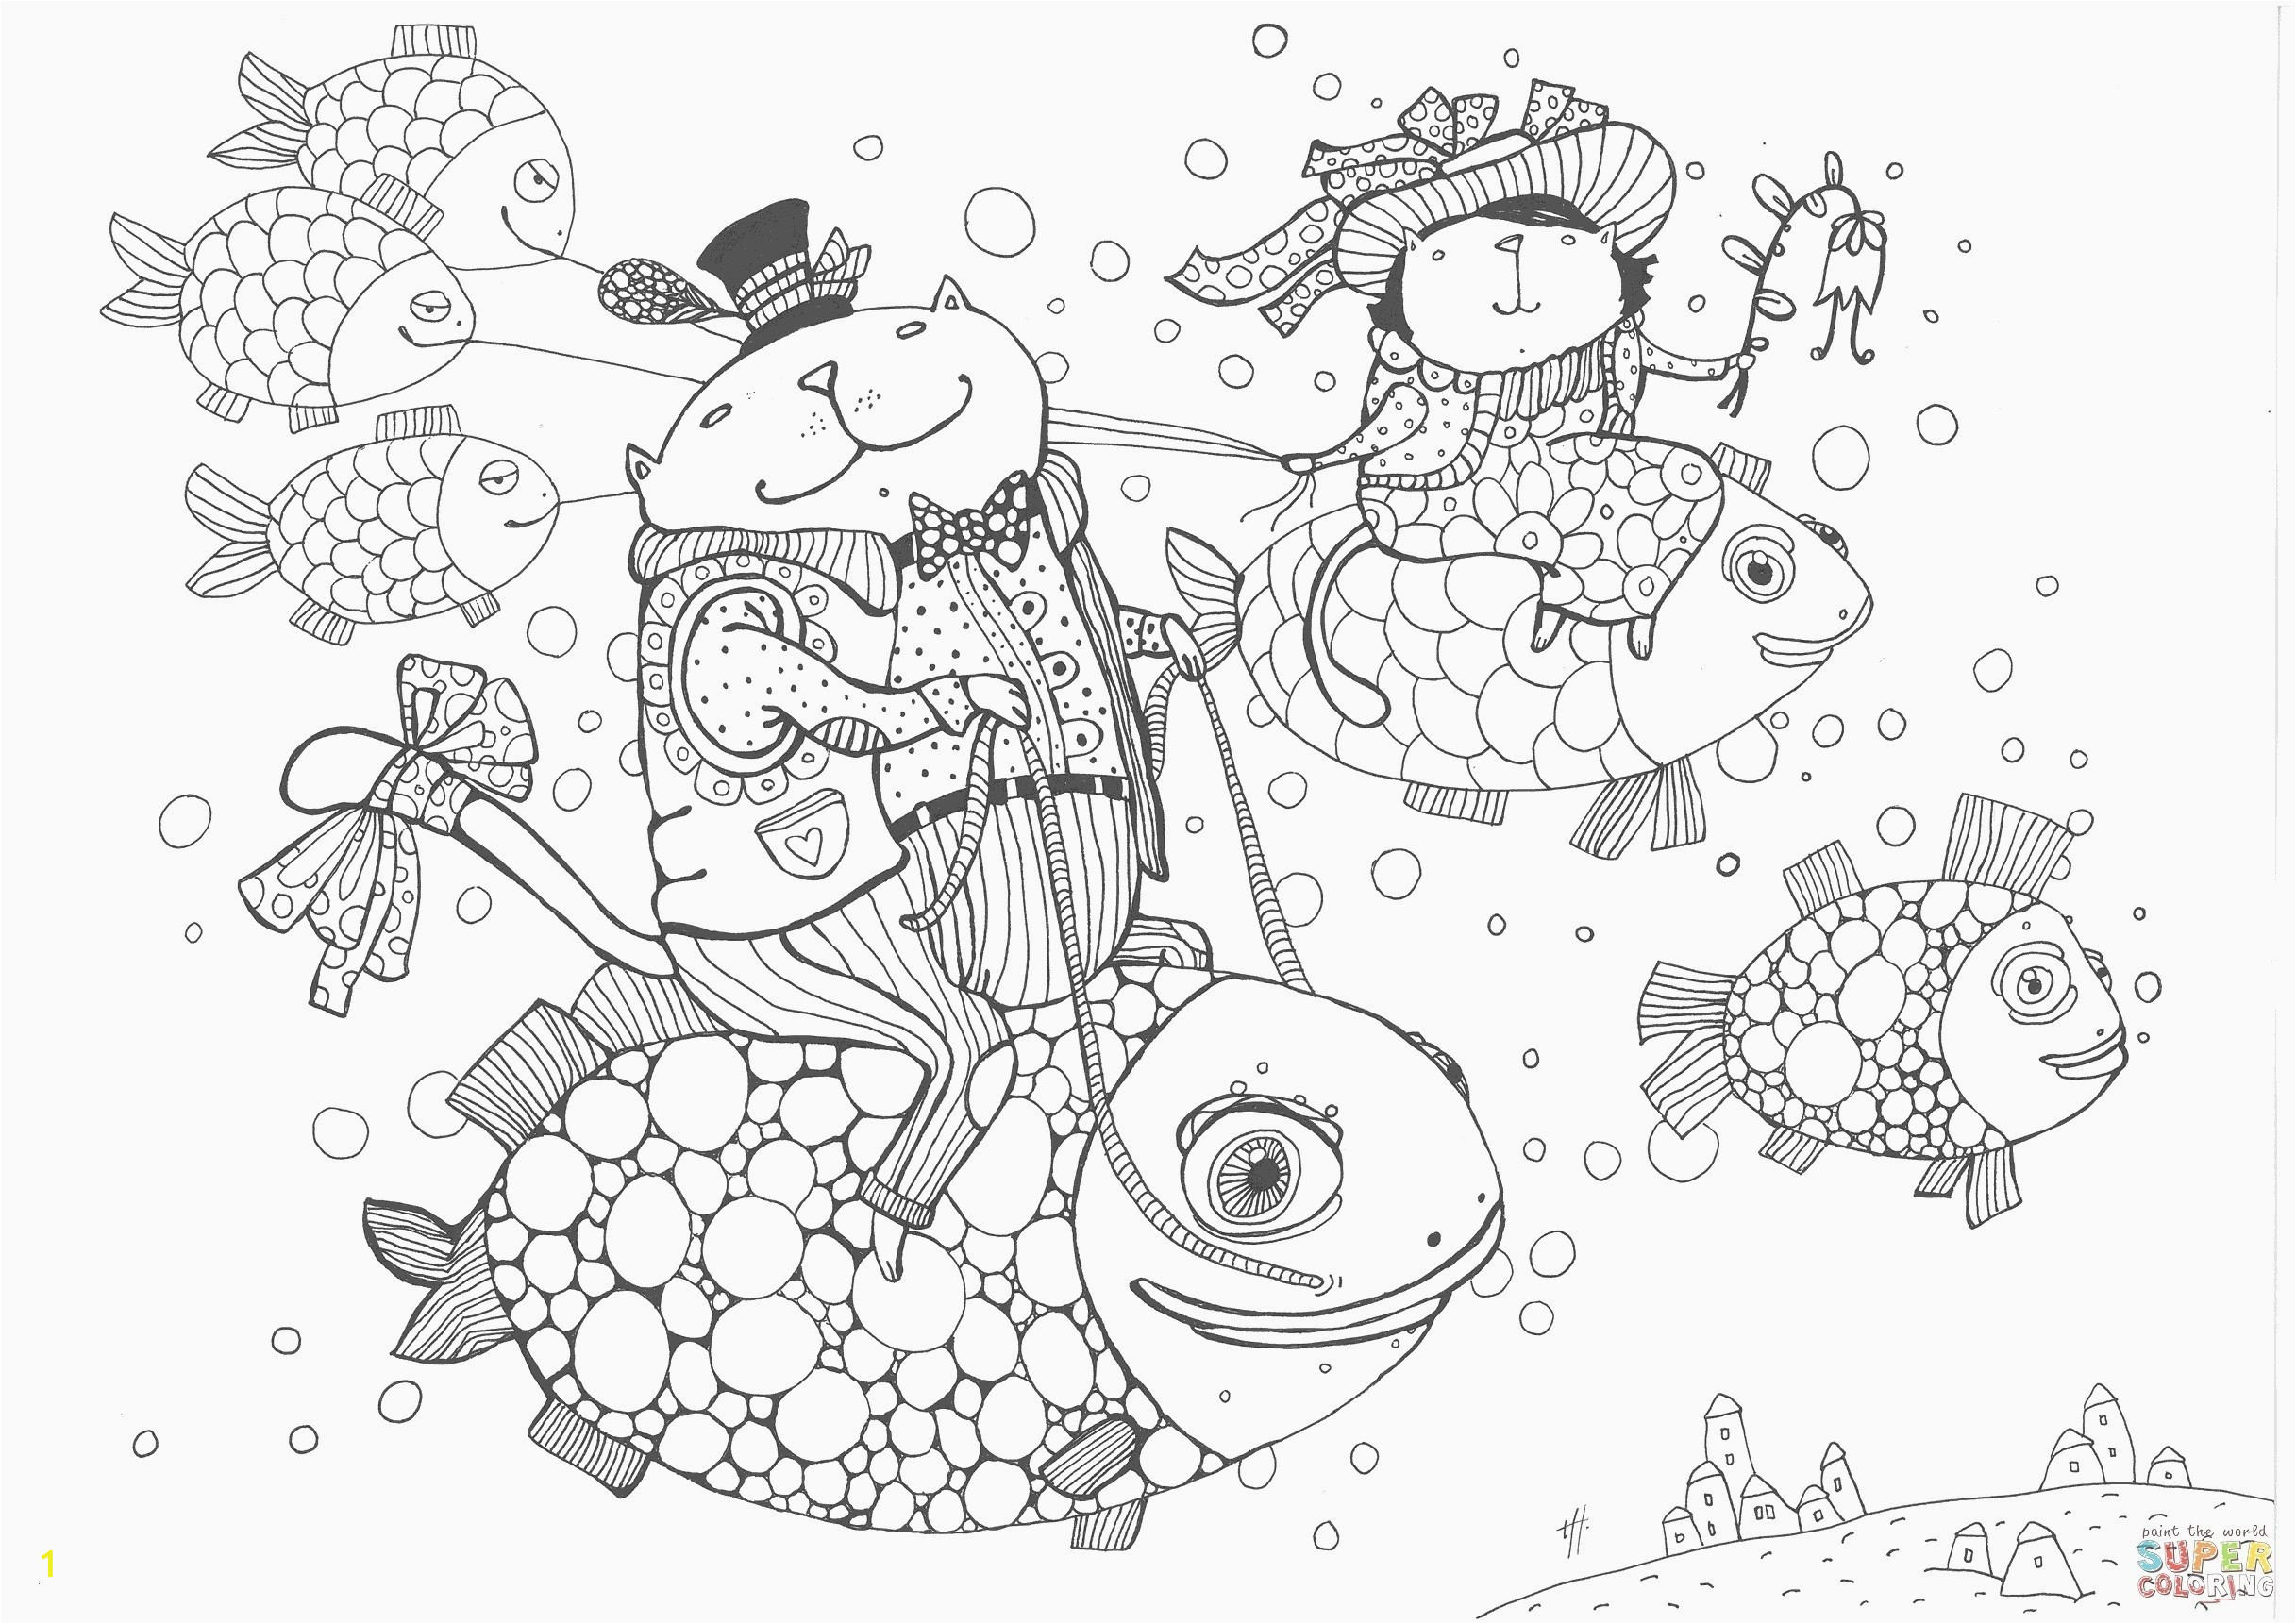 55 well soon card coloring pages awesome